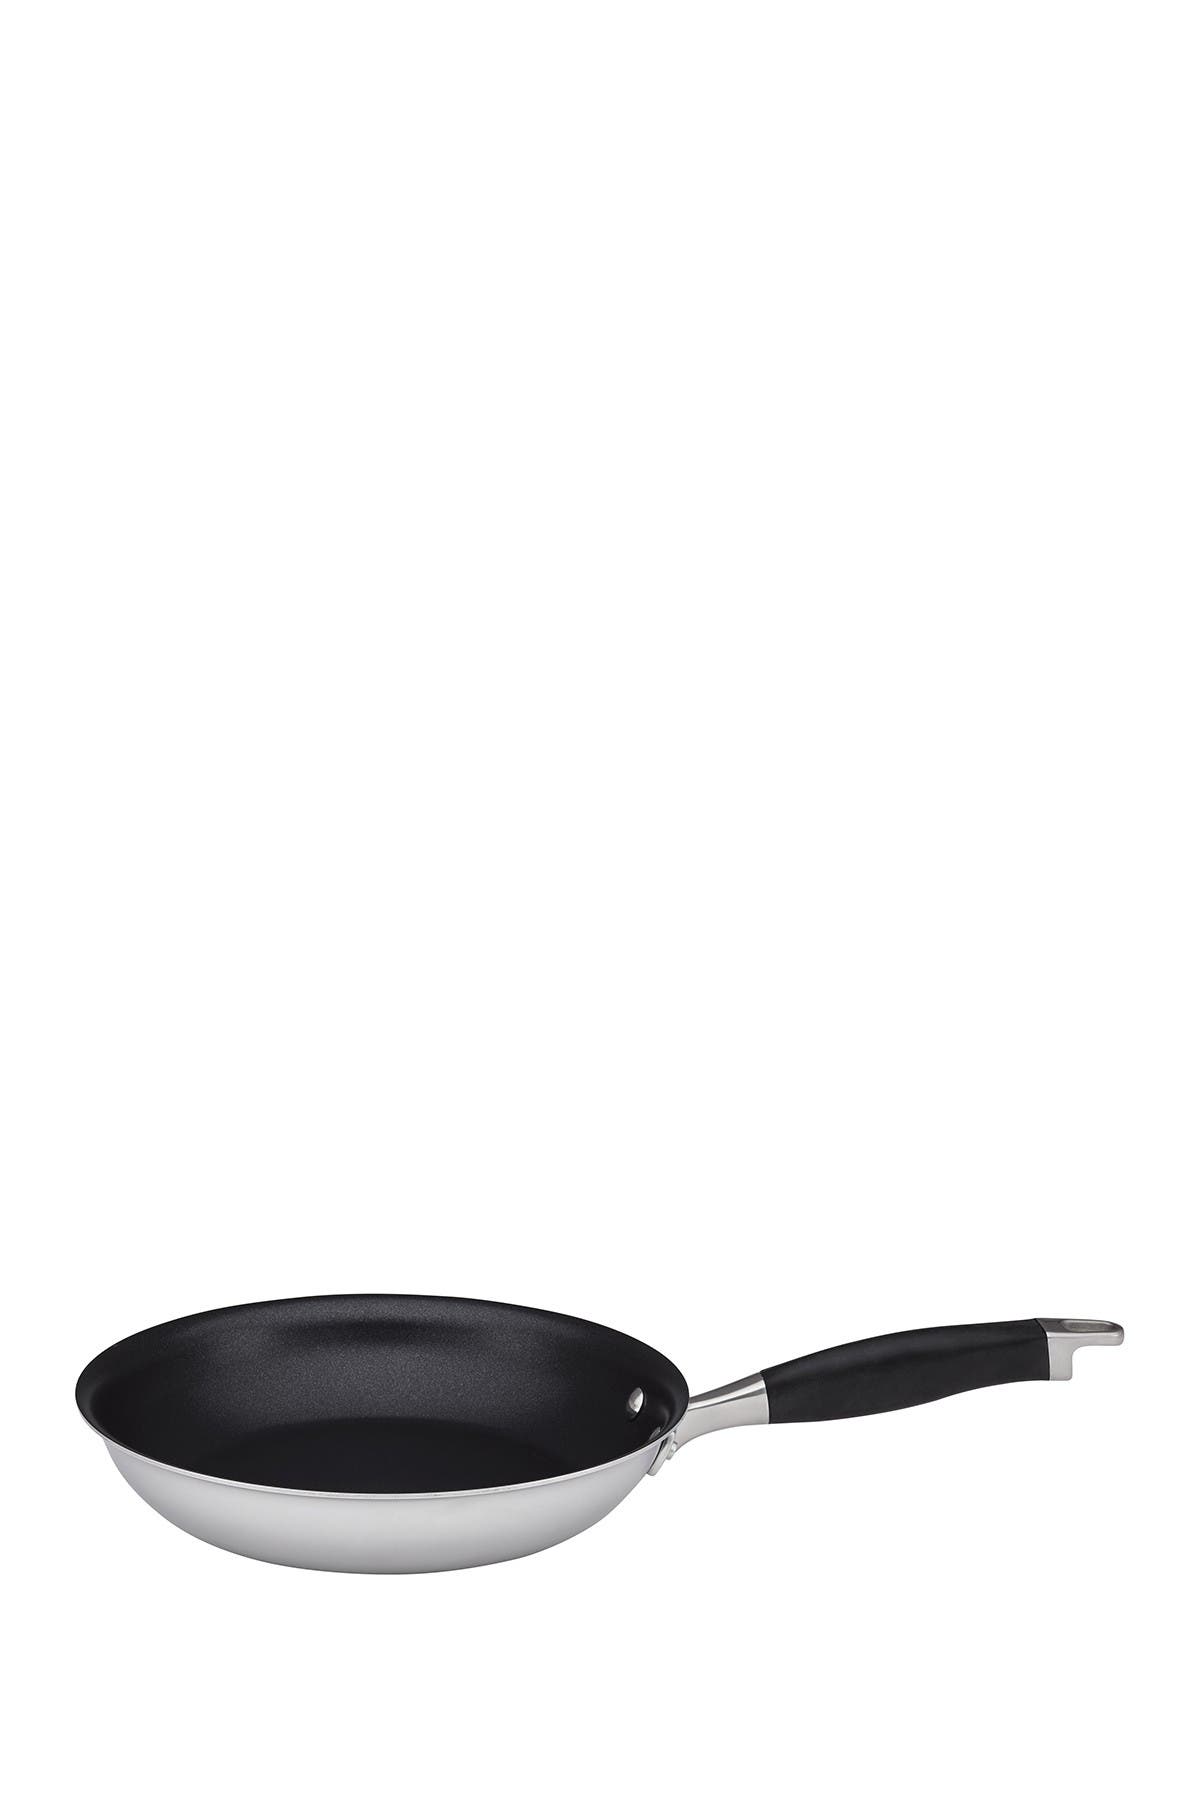 Anolon Tri-ply Onyx Stainless Steel French Skillet In Silver